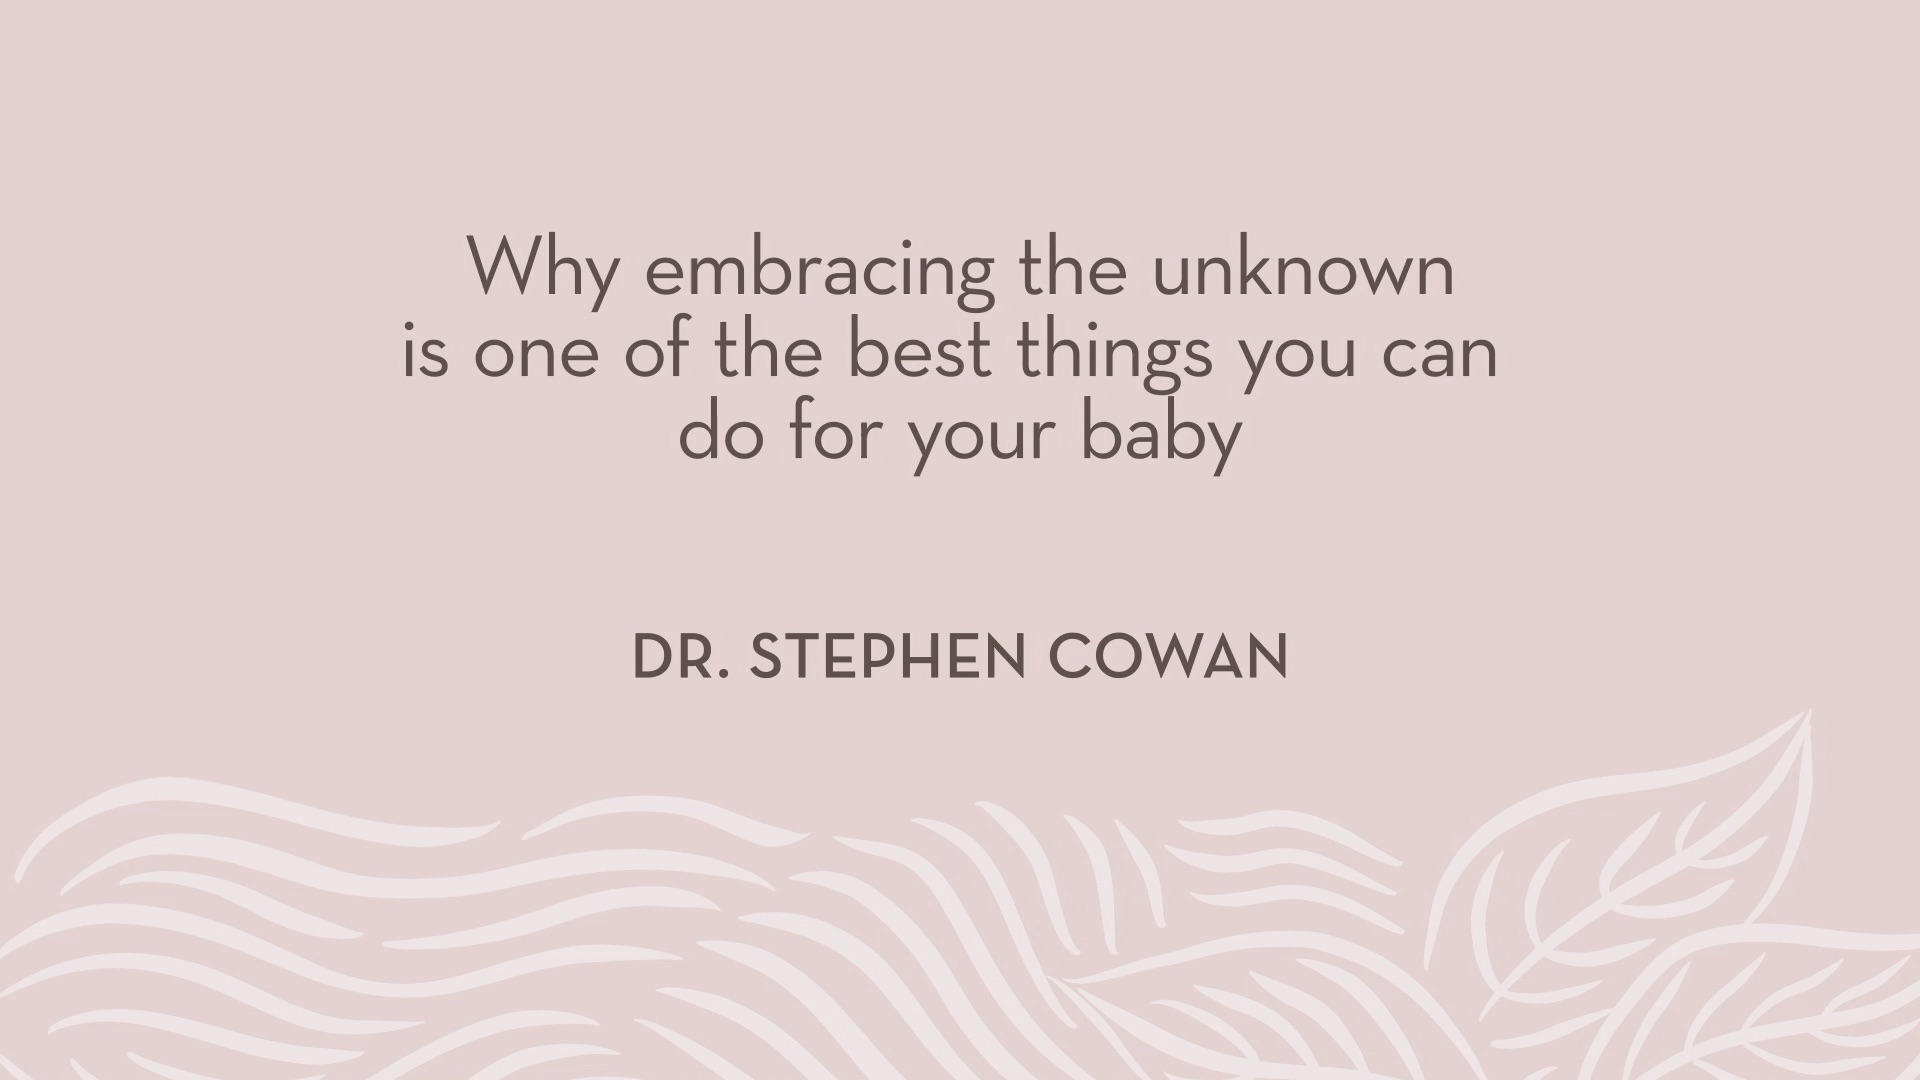 Dr. Cowan | Why embracing the unknown is one of the best things you can do for your baby